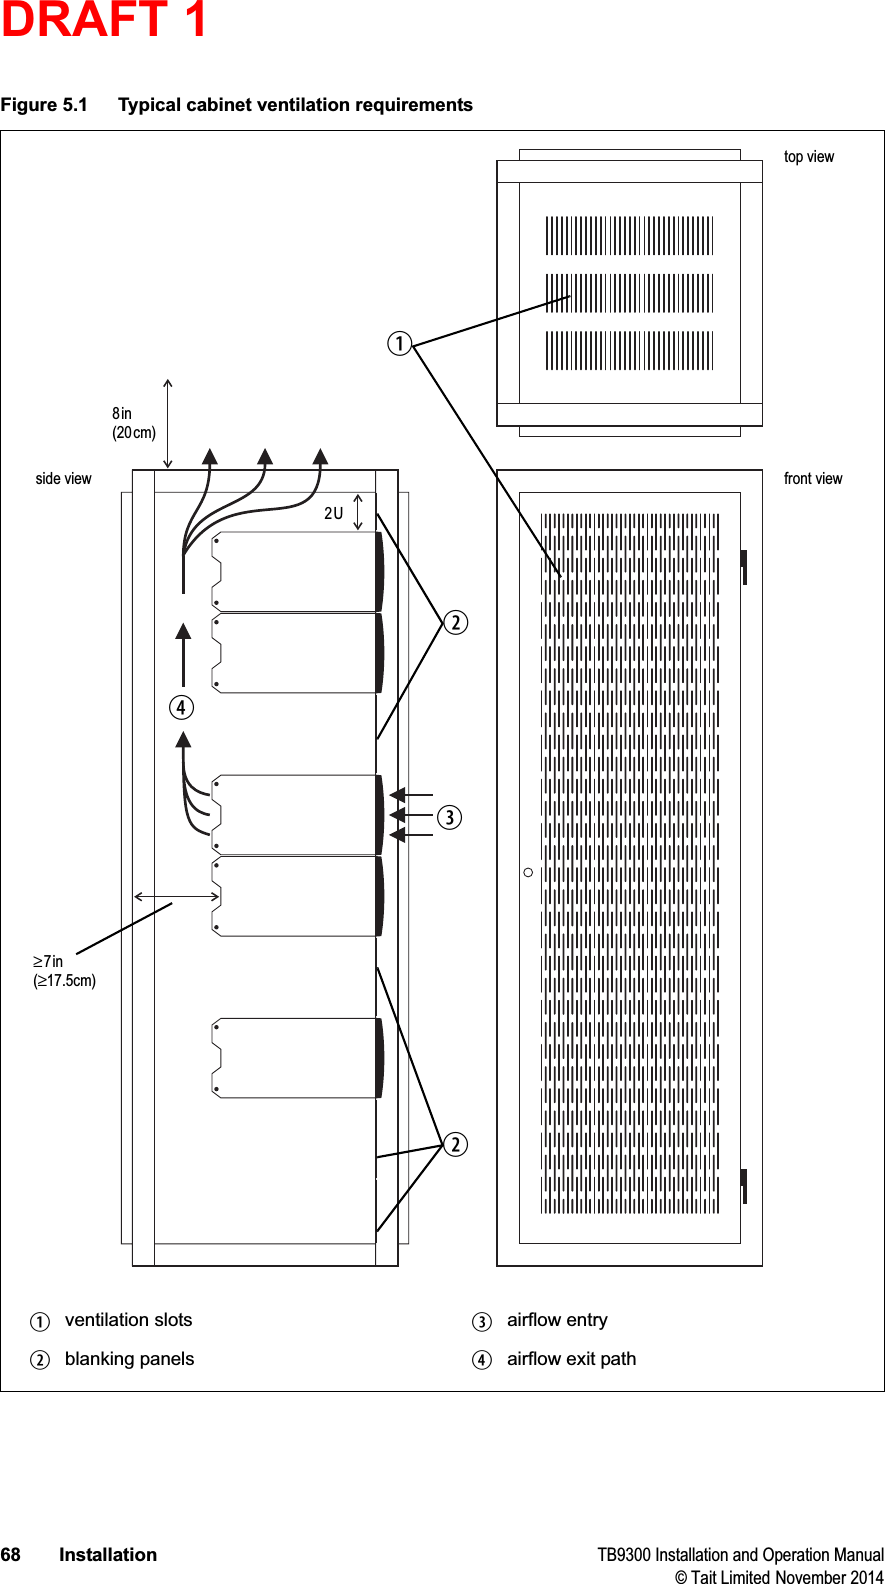 DRAFT 1 68 Installation TB9300 Installation and Operation Manual© Tait Limited November 2014Figure 5.1 Typical cabinet ventilation requirementsbventilation slots dairflow entrycblanking panels eairflow exit path8in(20cm)2U≥7in(≥17.5cm)side view front viewtop viewccdeb